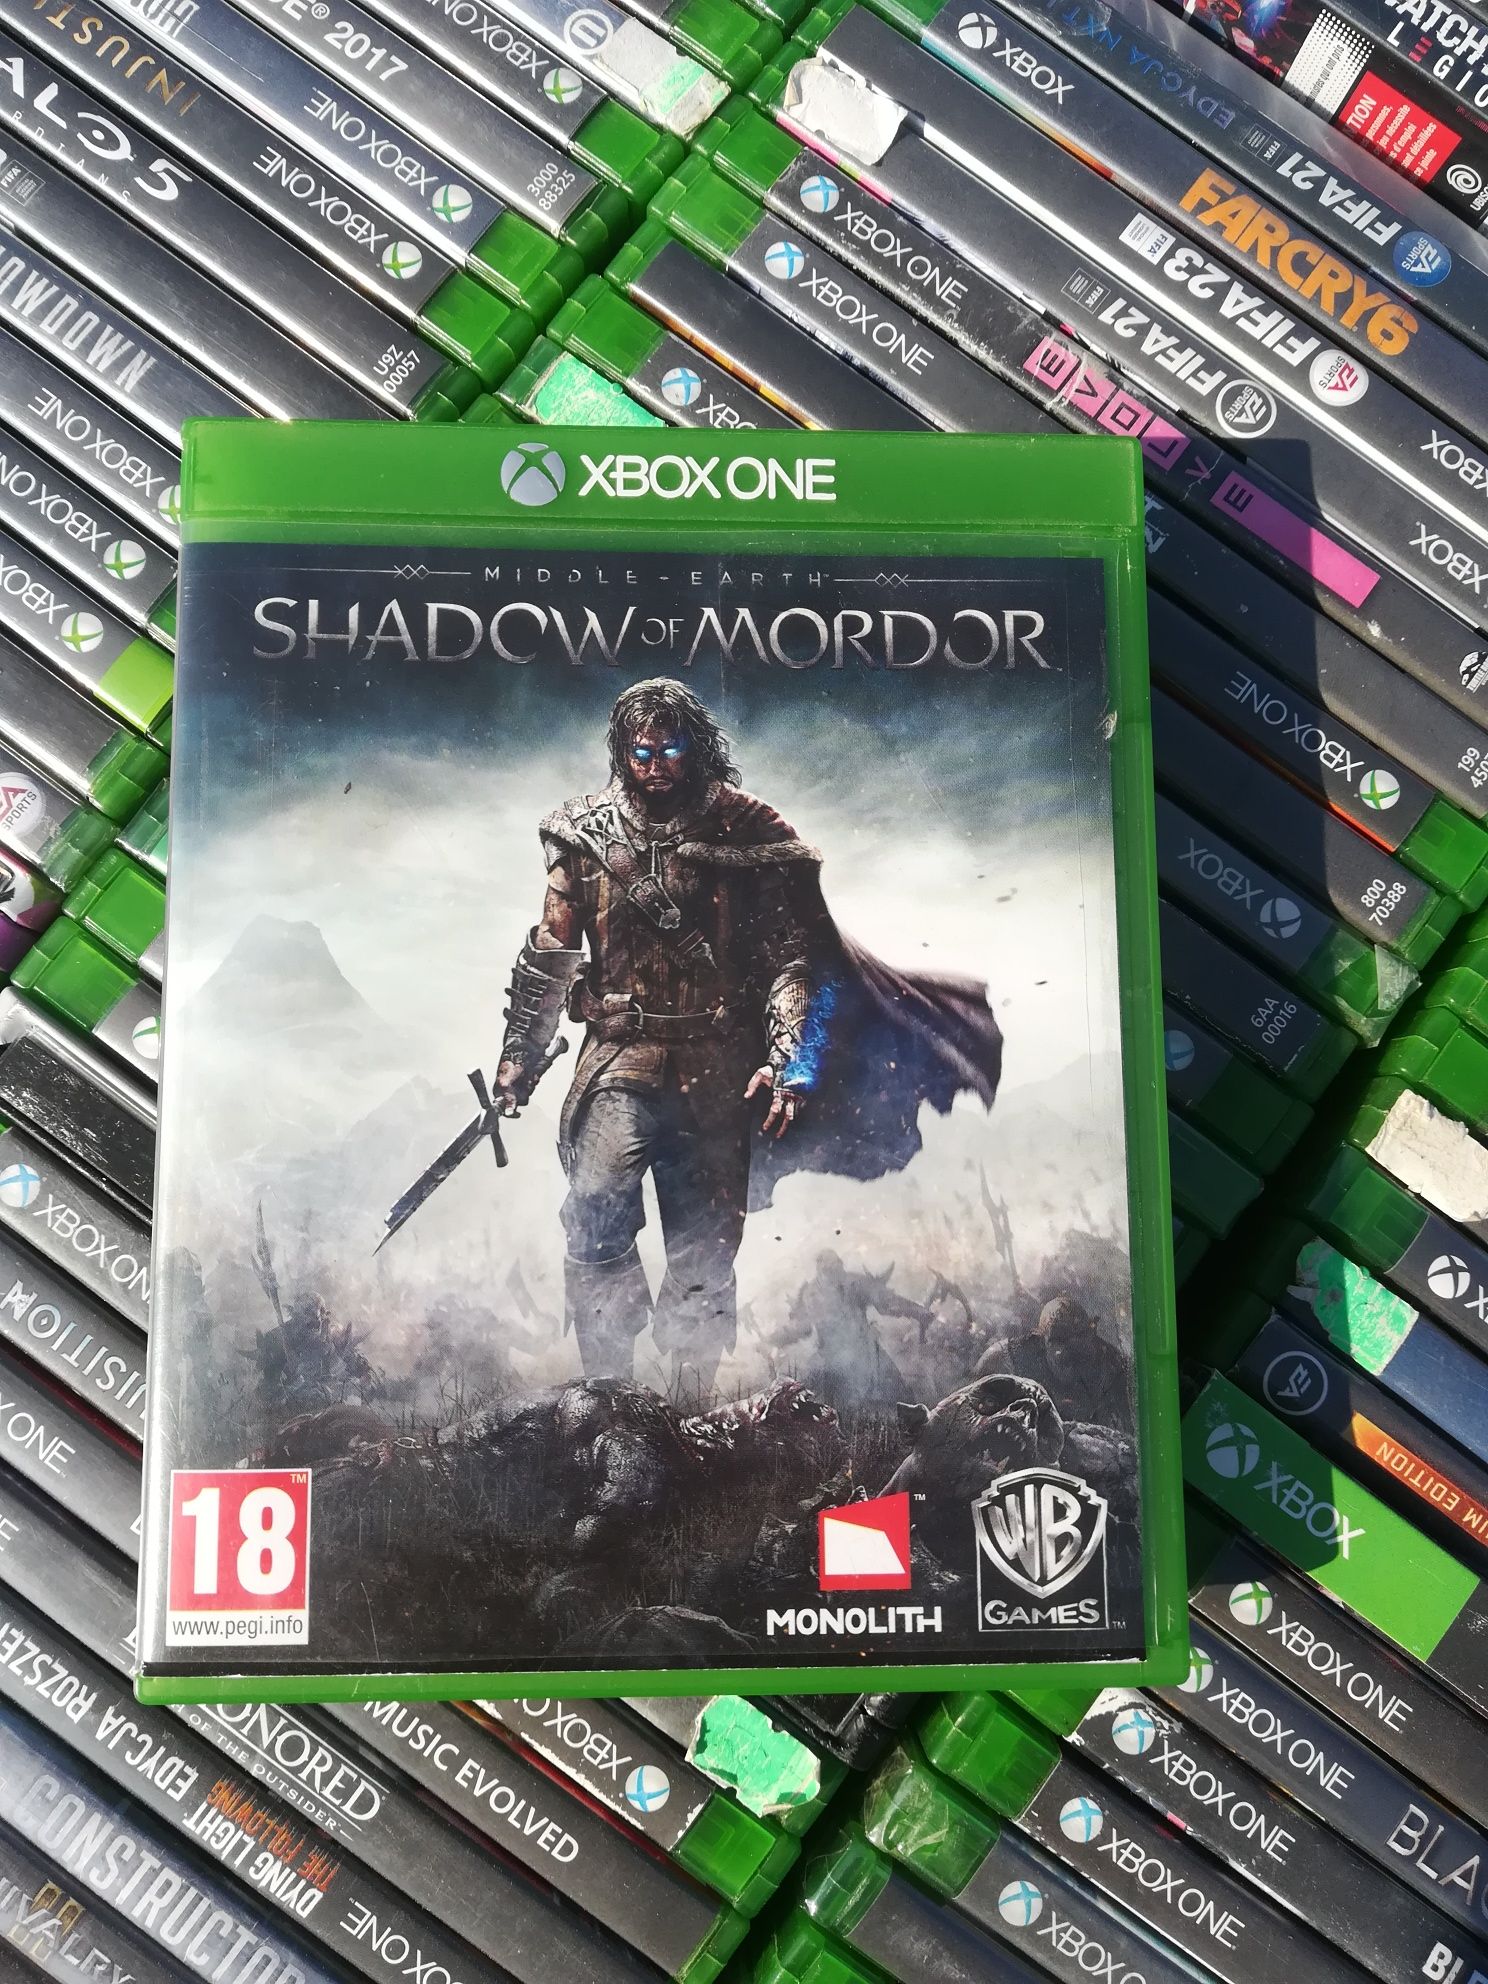 Middle of earth Shadow of mordor xbox one